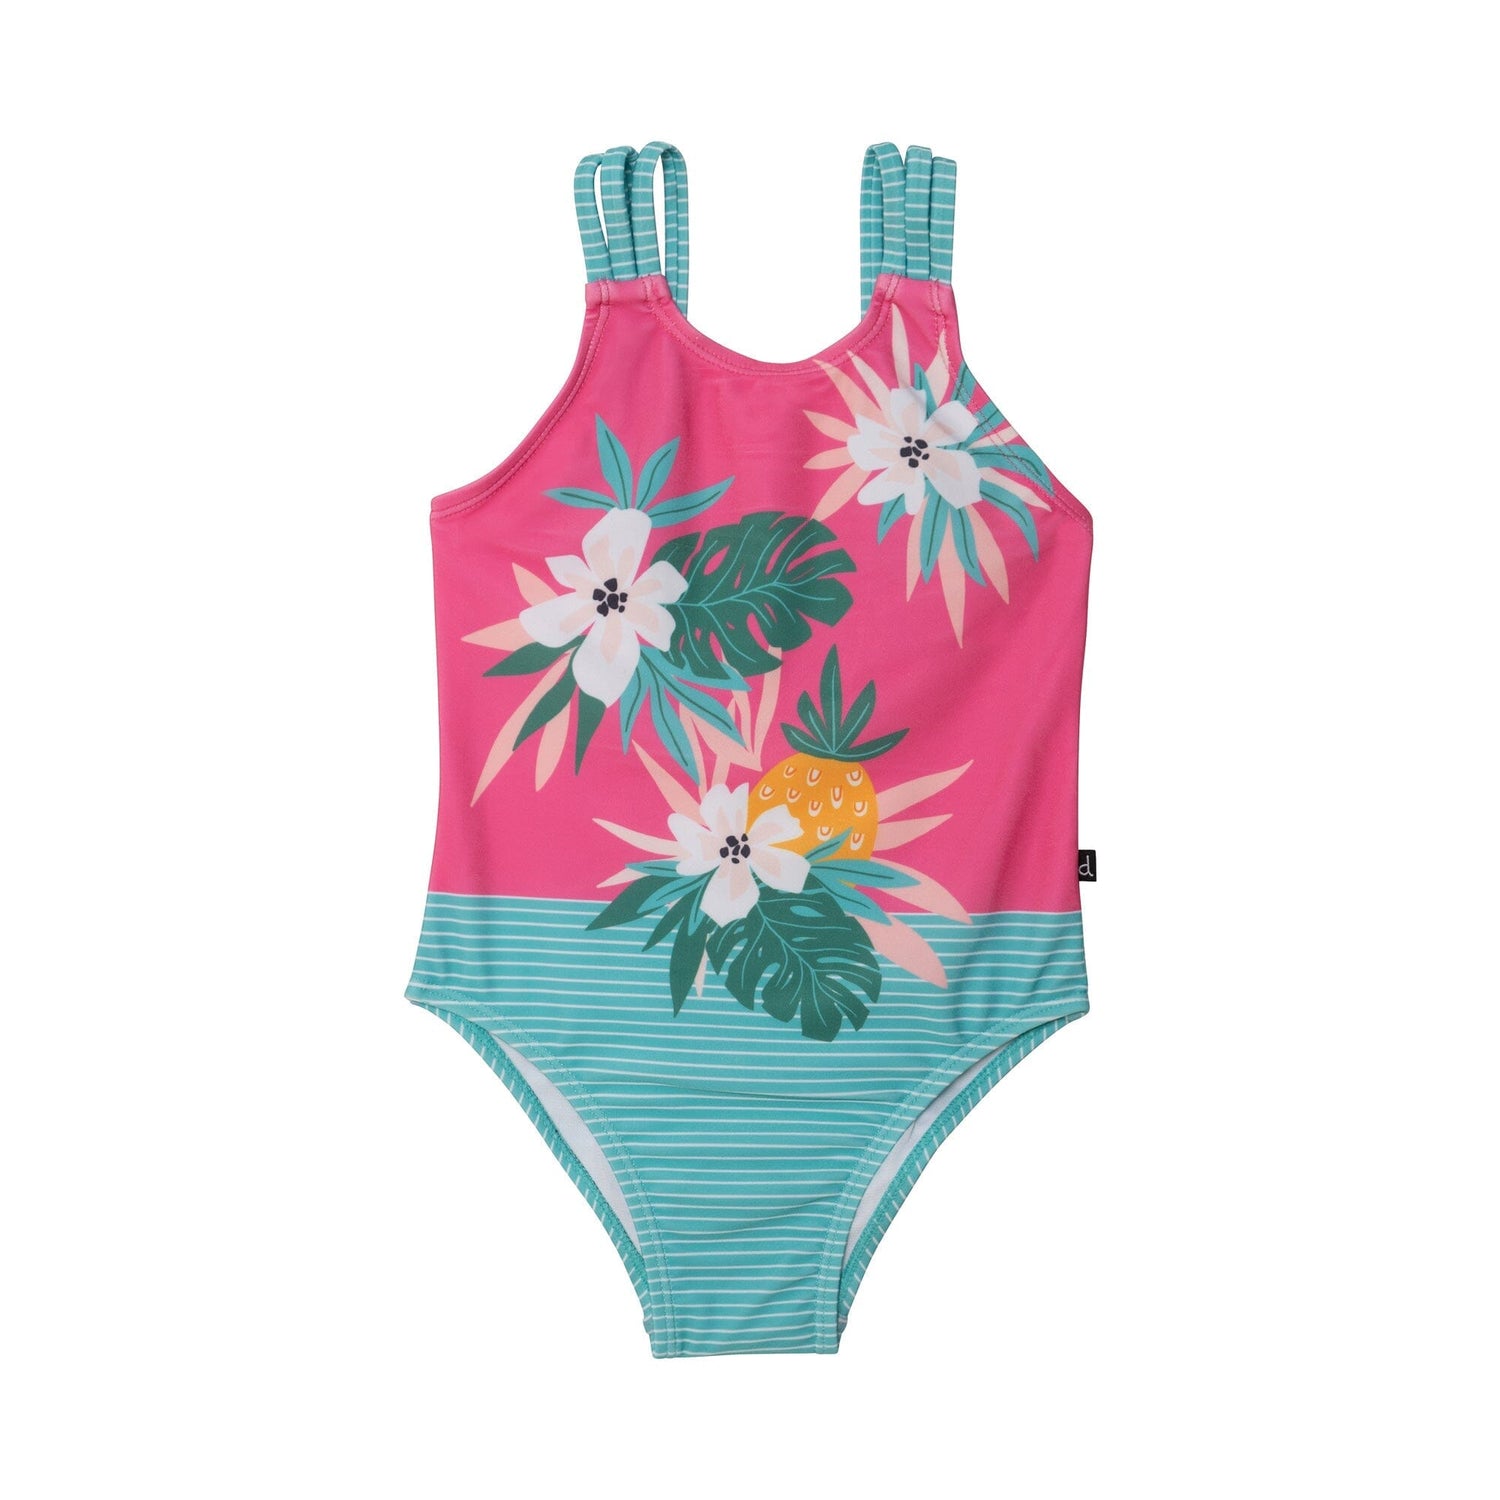 Printed One Piece Swimsuit Pink & Green Tropical Flowers - E30NG51_000